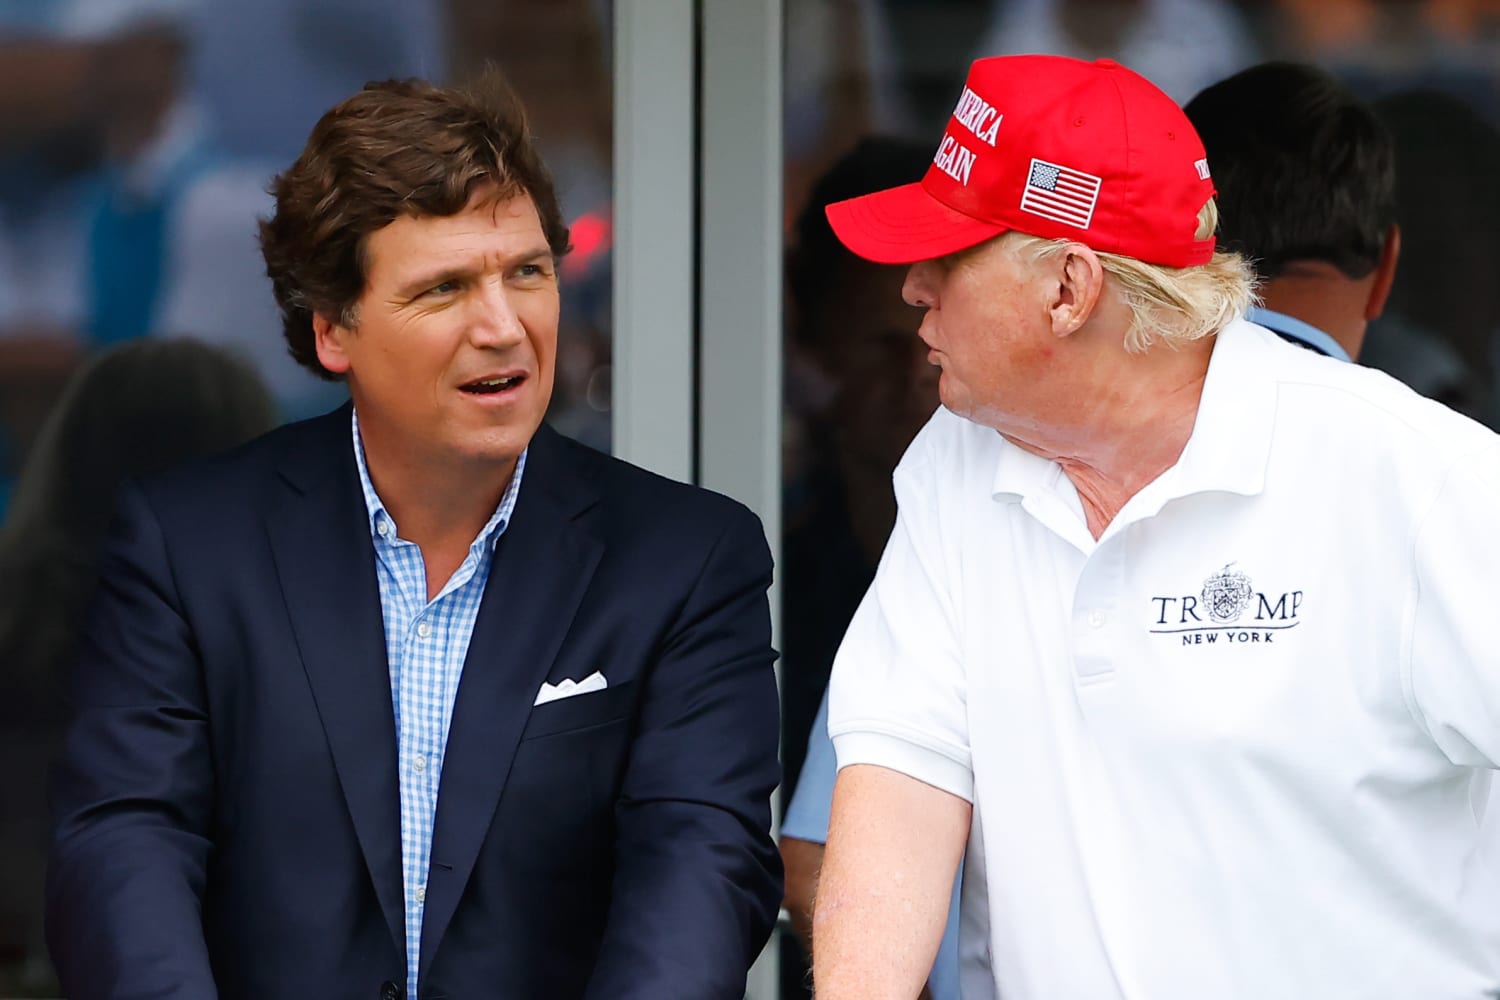 Could Tucker Carlson Be Persuaded To Run As Trump’s VP?